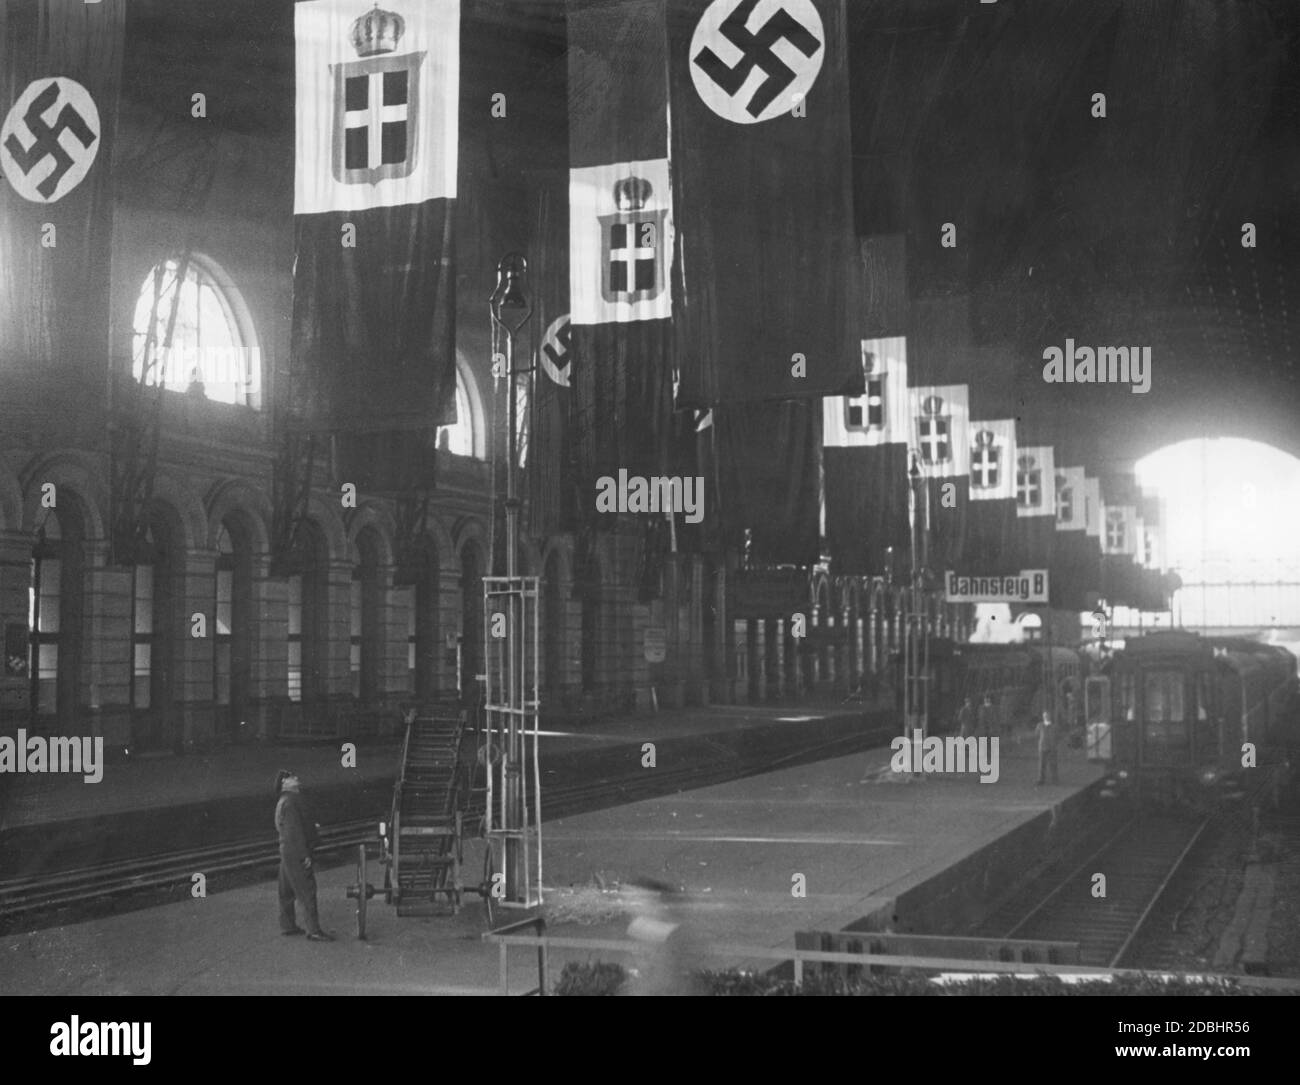 Swastika flags and Italian flags are hung on platform B of the Lehrter Bahnhof in Berlin on May 9, 1938. The occasion was the return of Adolf Hitler from a trip to Italy on May 10. Stock Photo